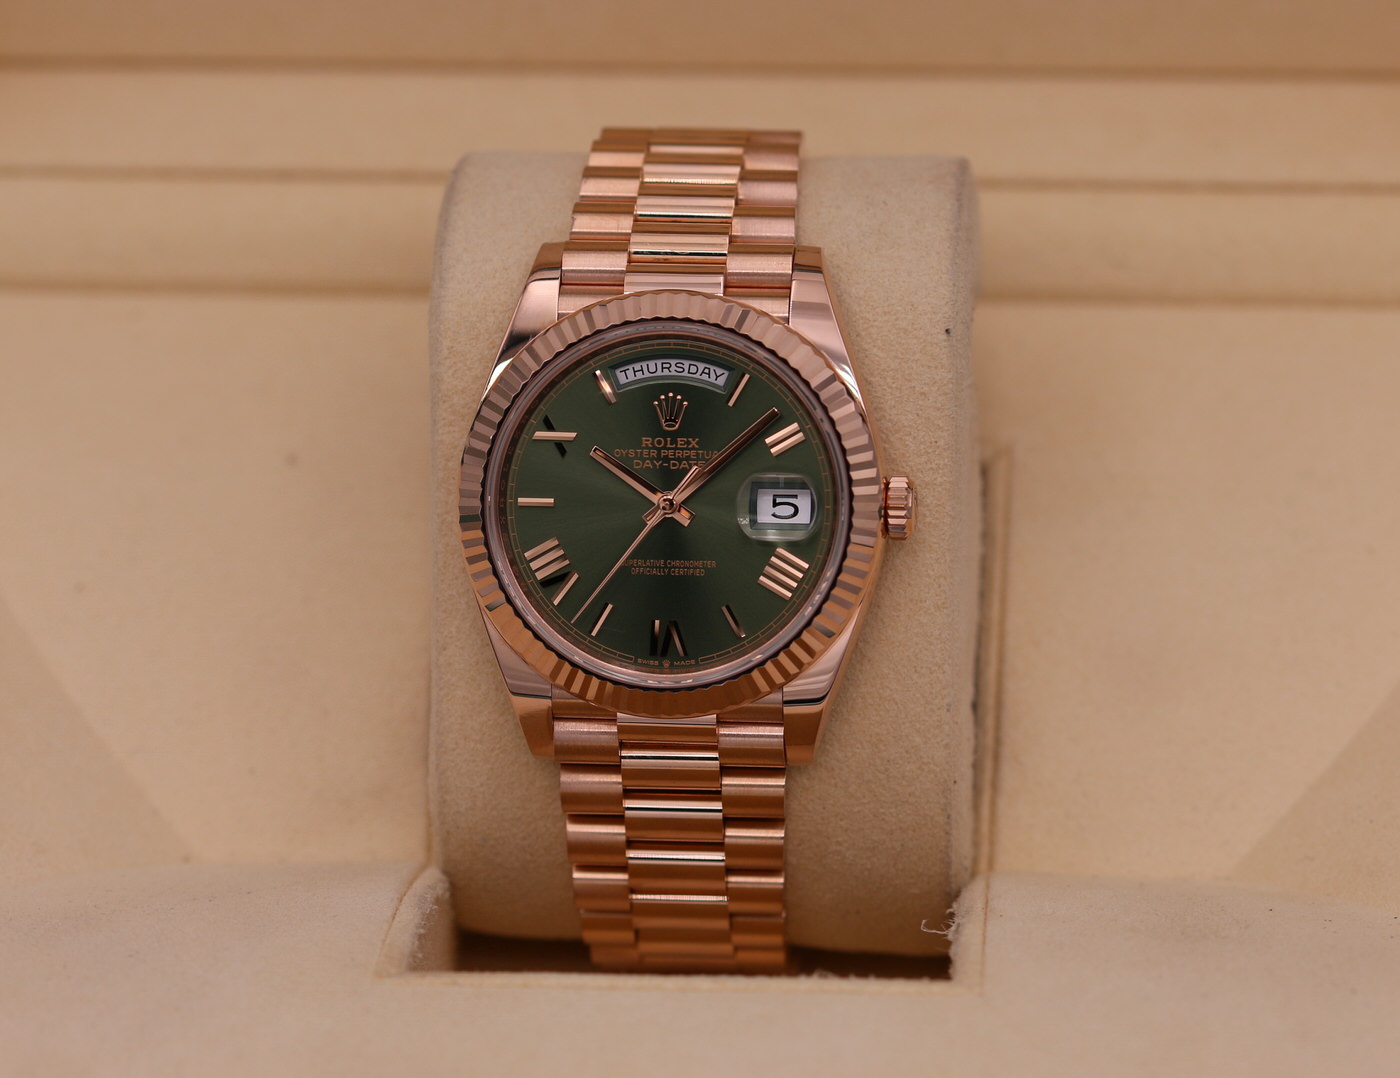 Nashville Watch – We specialize in buying and selling Rolex and